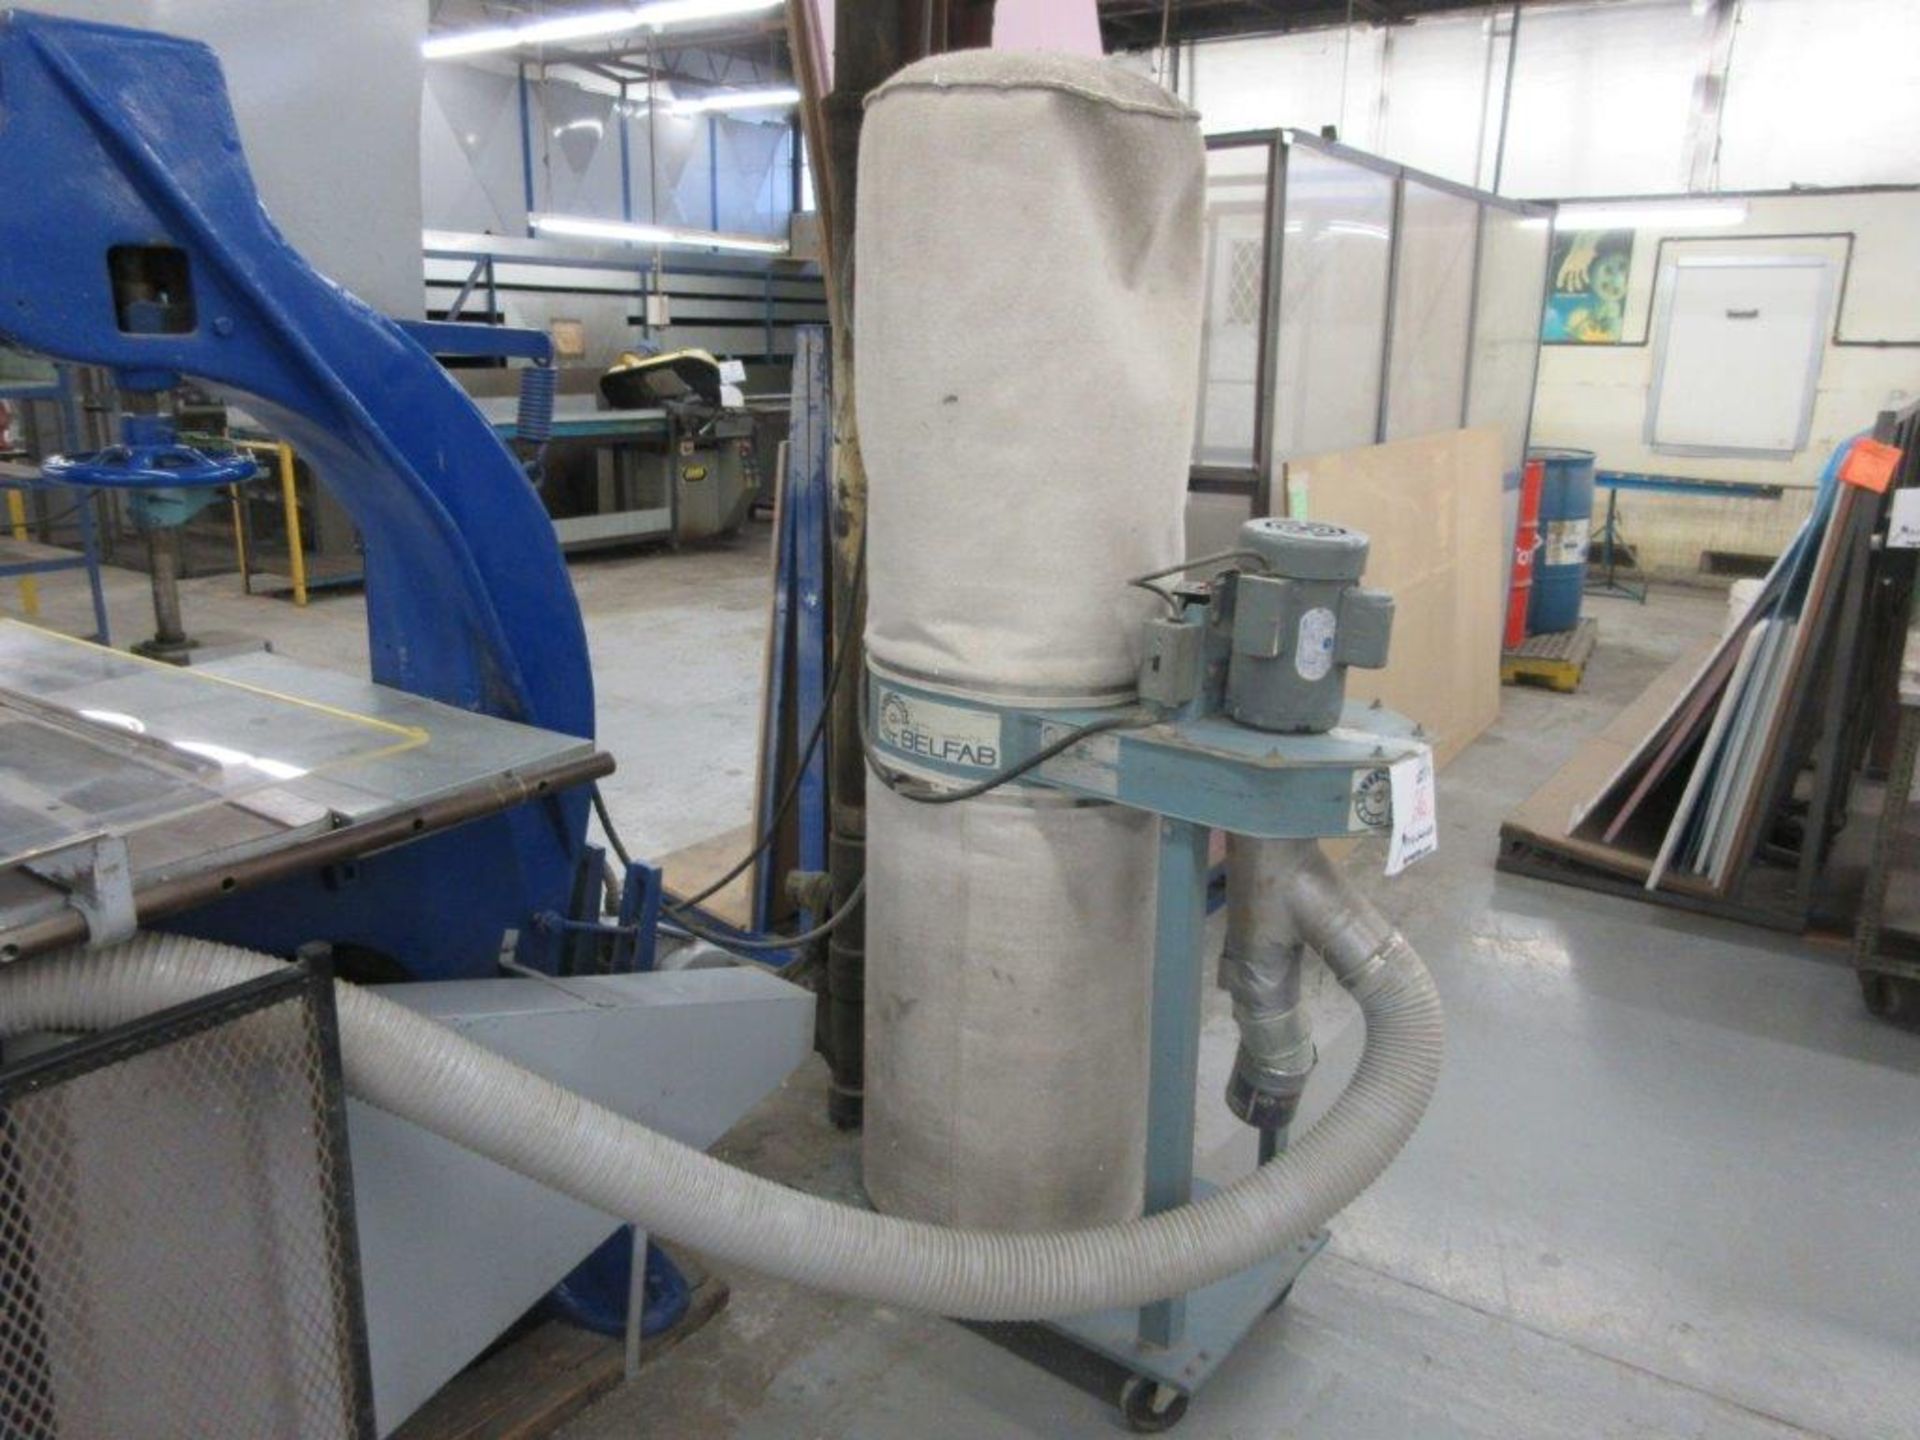 BELFAB Dust Collector 2hp, 220 volts - Image 2 of 2